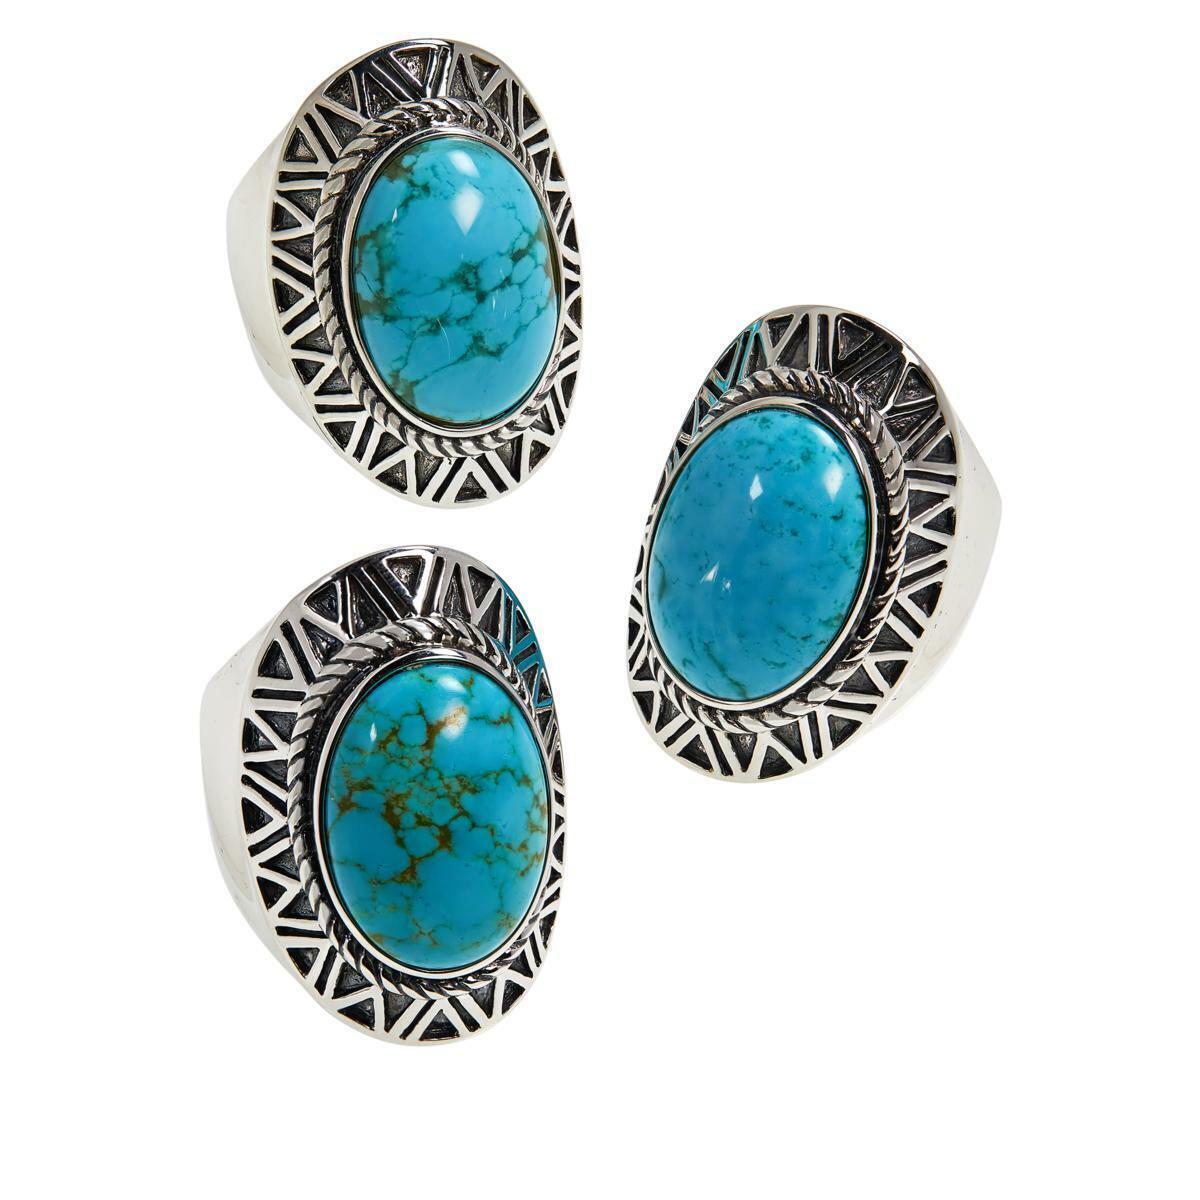 Jay King Gallery Collection Sonoran Turquoise Oval Ring. Size 6